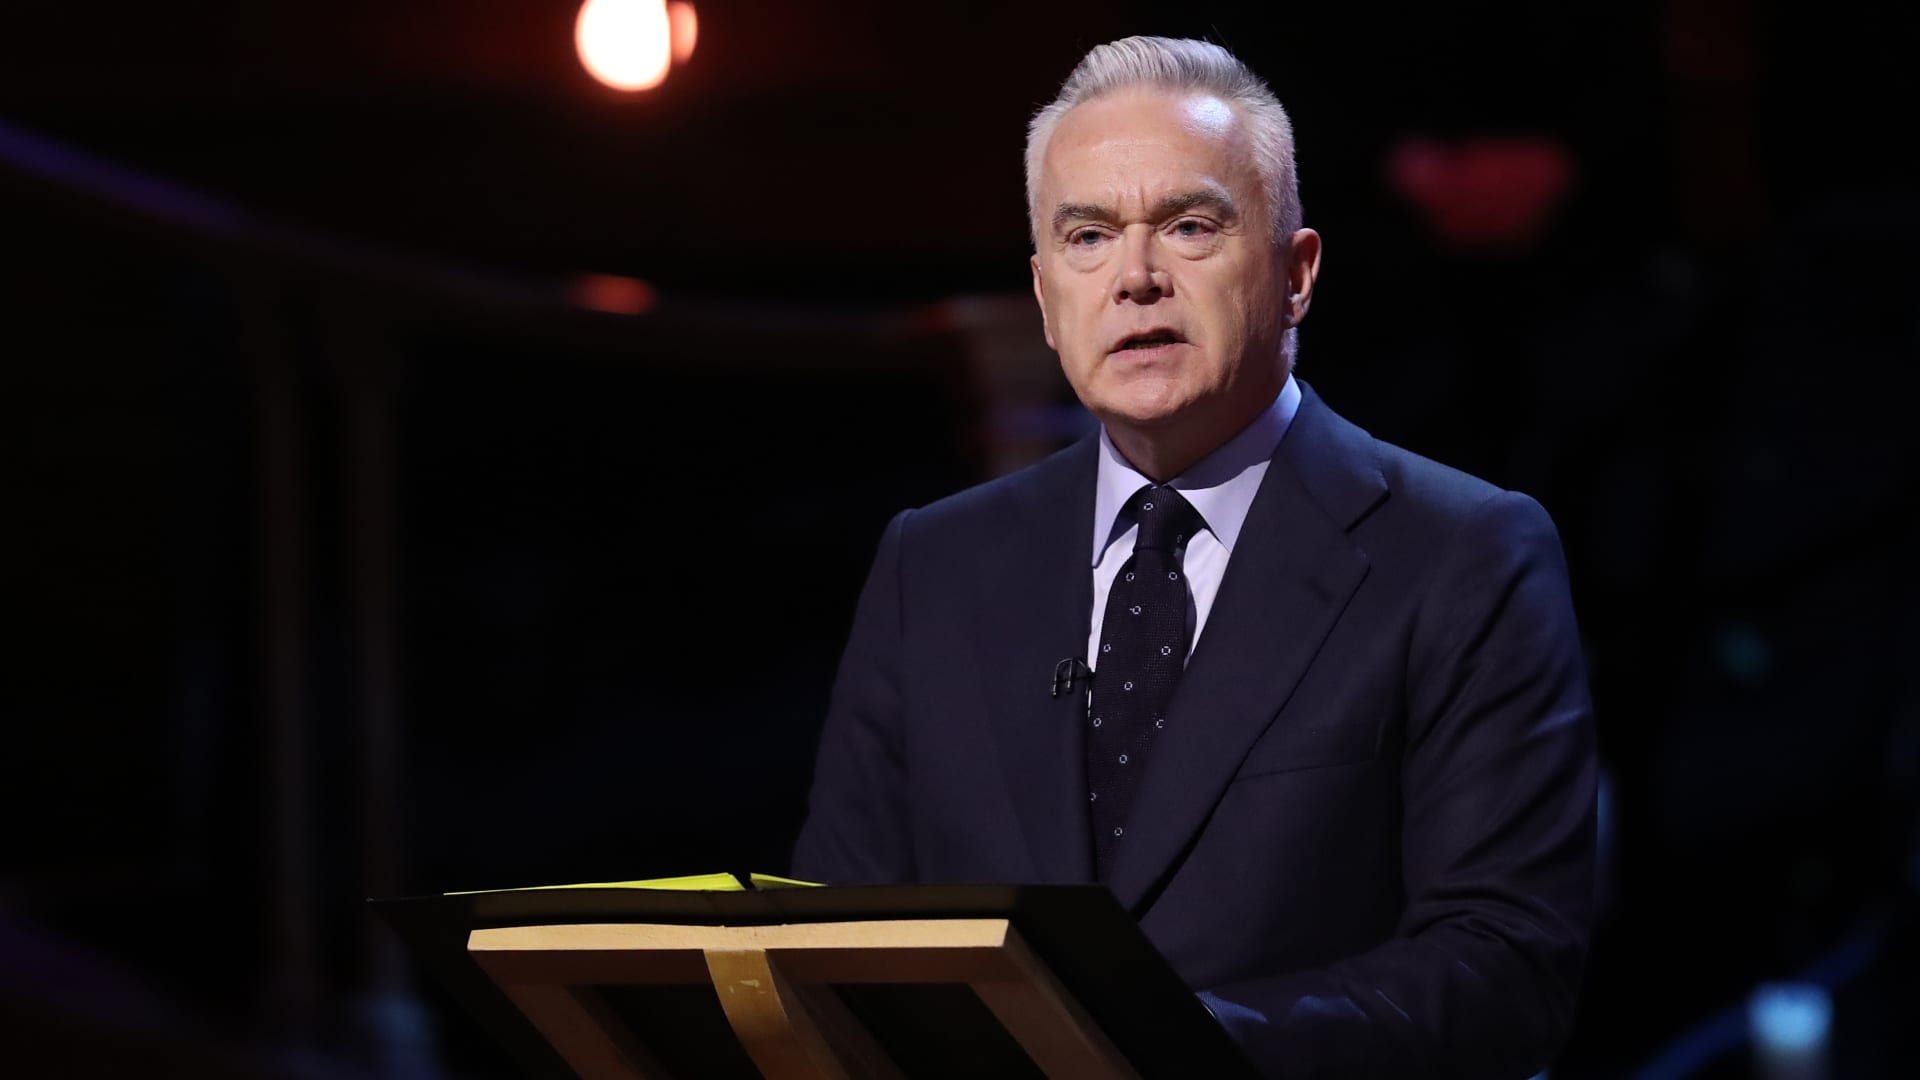 Huw Edwards named as BBC anchor accused of paying teen for explicit pictures